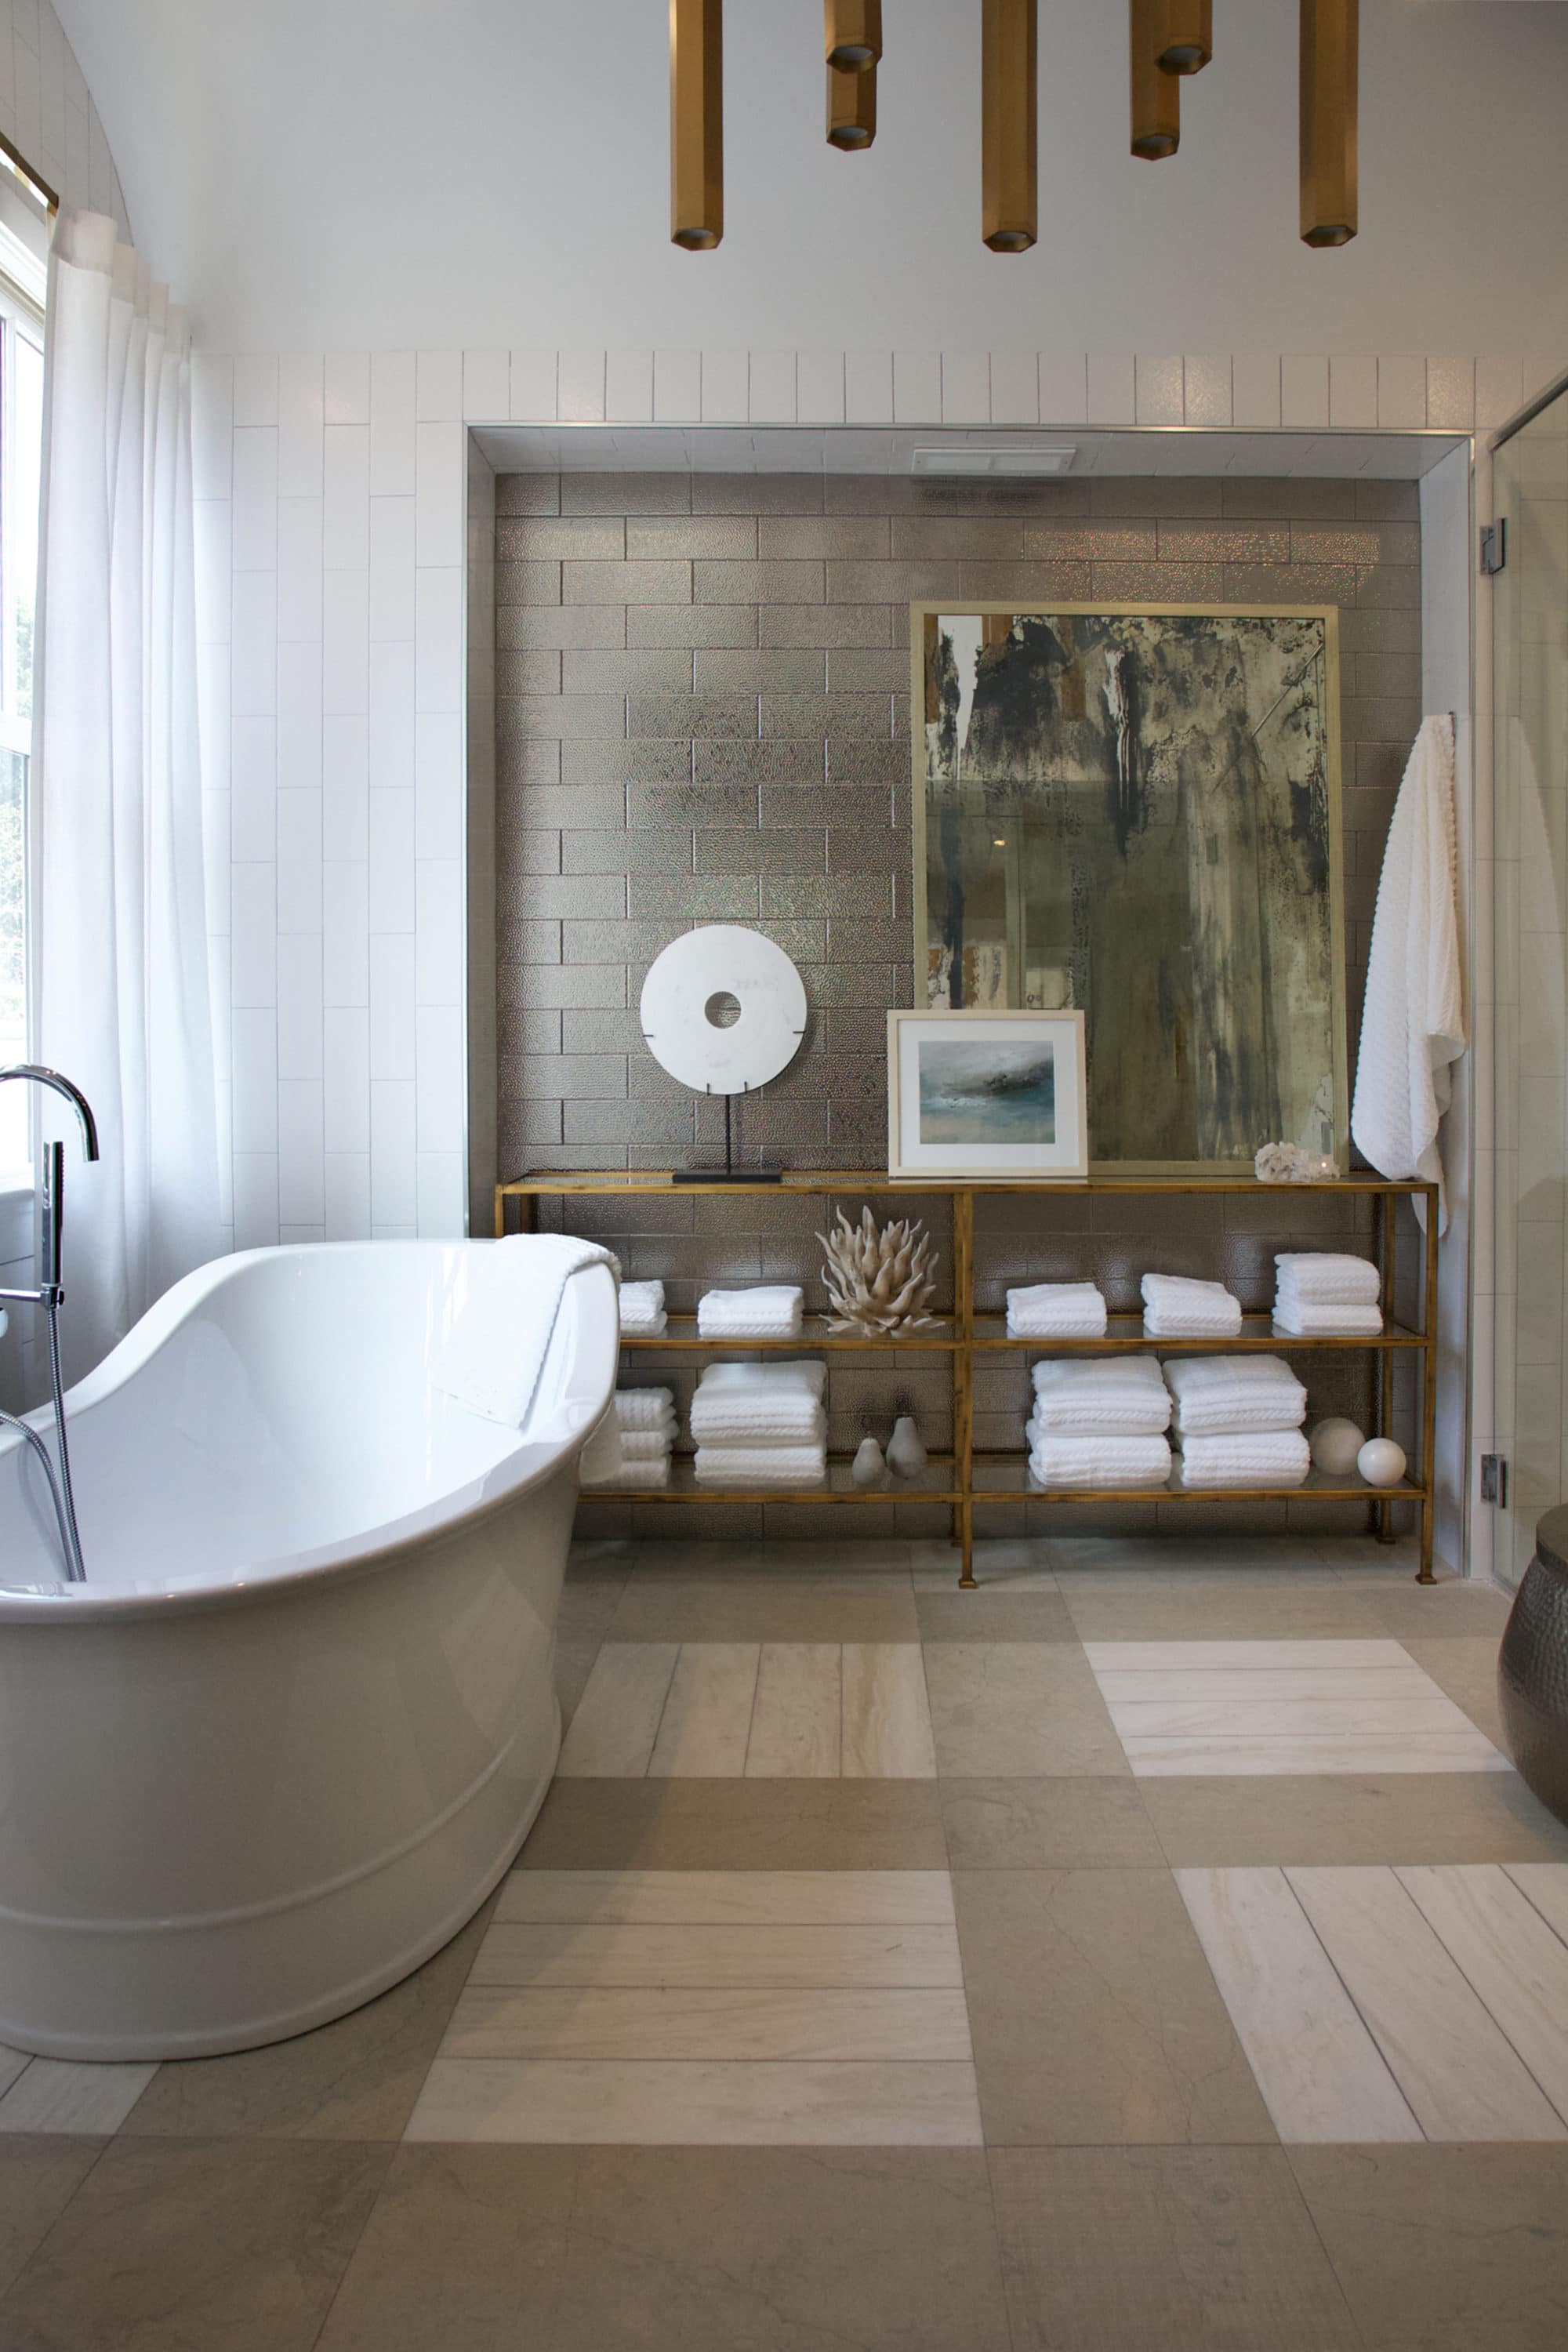 Give Your Bathroom A Spa Like Feel With These Tips And Tricks Cr Construction Resources,How To Install Recessed Lighting Without Attic Access